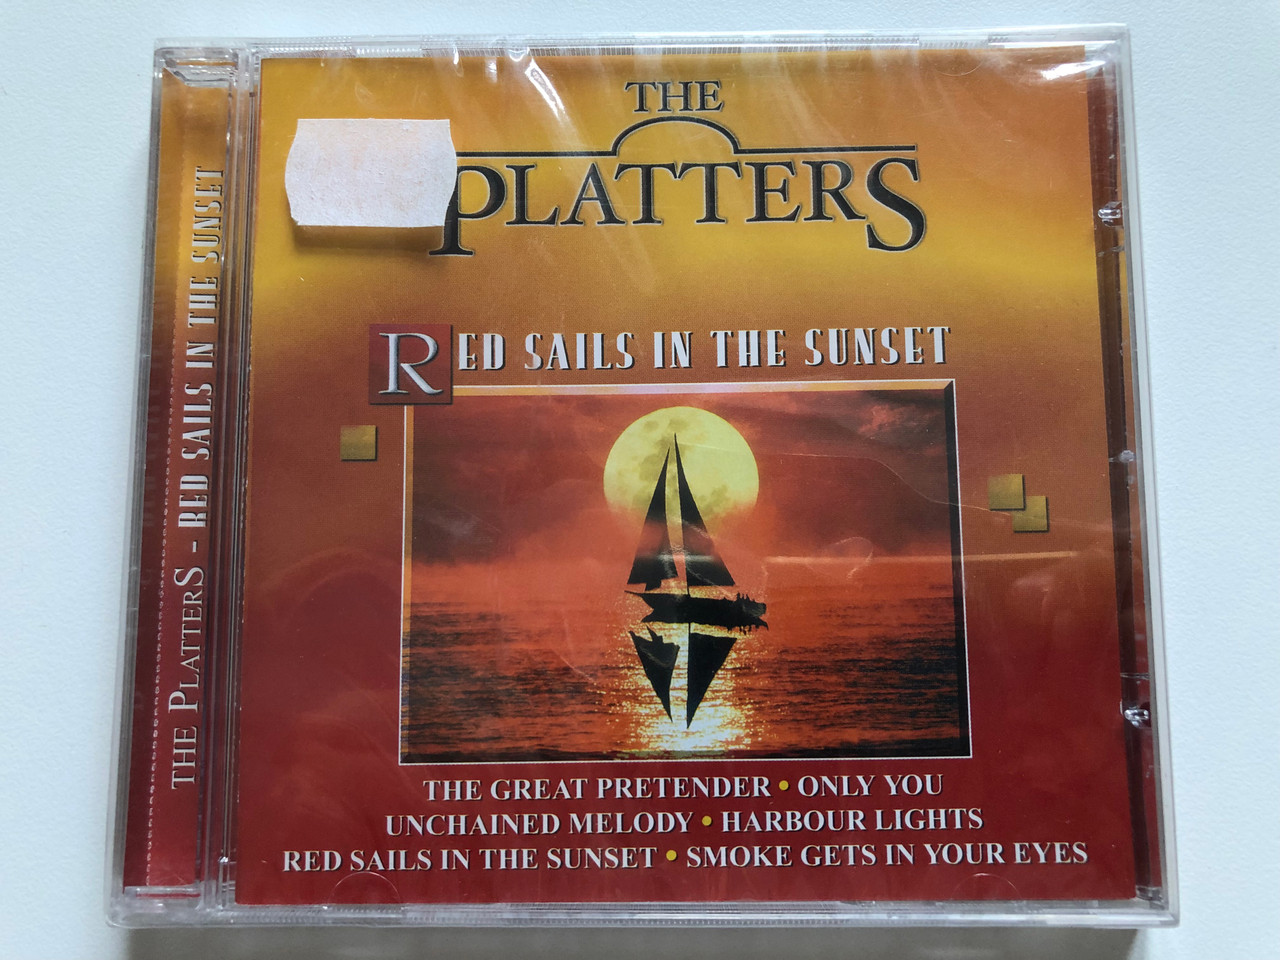 https://cdn10.bigcommerce.com/s-62bdpkt7pb/products/0/images/201320/The_Platters_Red_Sails_In_The_Sunset_The_Great_Pretender_Only_You_Unchained_Melody_Harbour_Lights_Red_Sails_In_The_Sunset_Smoke_Gets_In_Your_Eyes_Going_For_A_Song_Audio_CD_GFS_163_1__66756.1638986859.1280.1280.JPG?c=2&_gl=1*cwa7k8*_ga*MjA2NTIxMjE2MC4xNTkwNTEyNTMy*_ga_WS2VZYPC6G*MTYzODk3MDI5OS4yMDYuMS4xNjM4OTg2NzM0LjIz